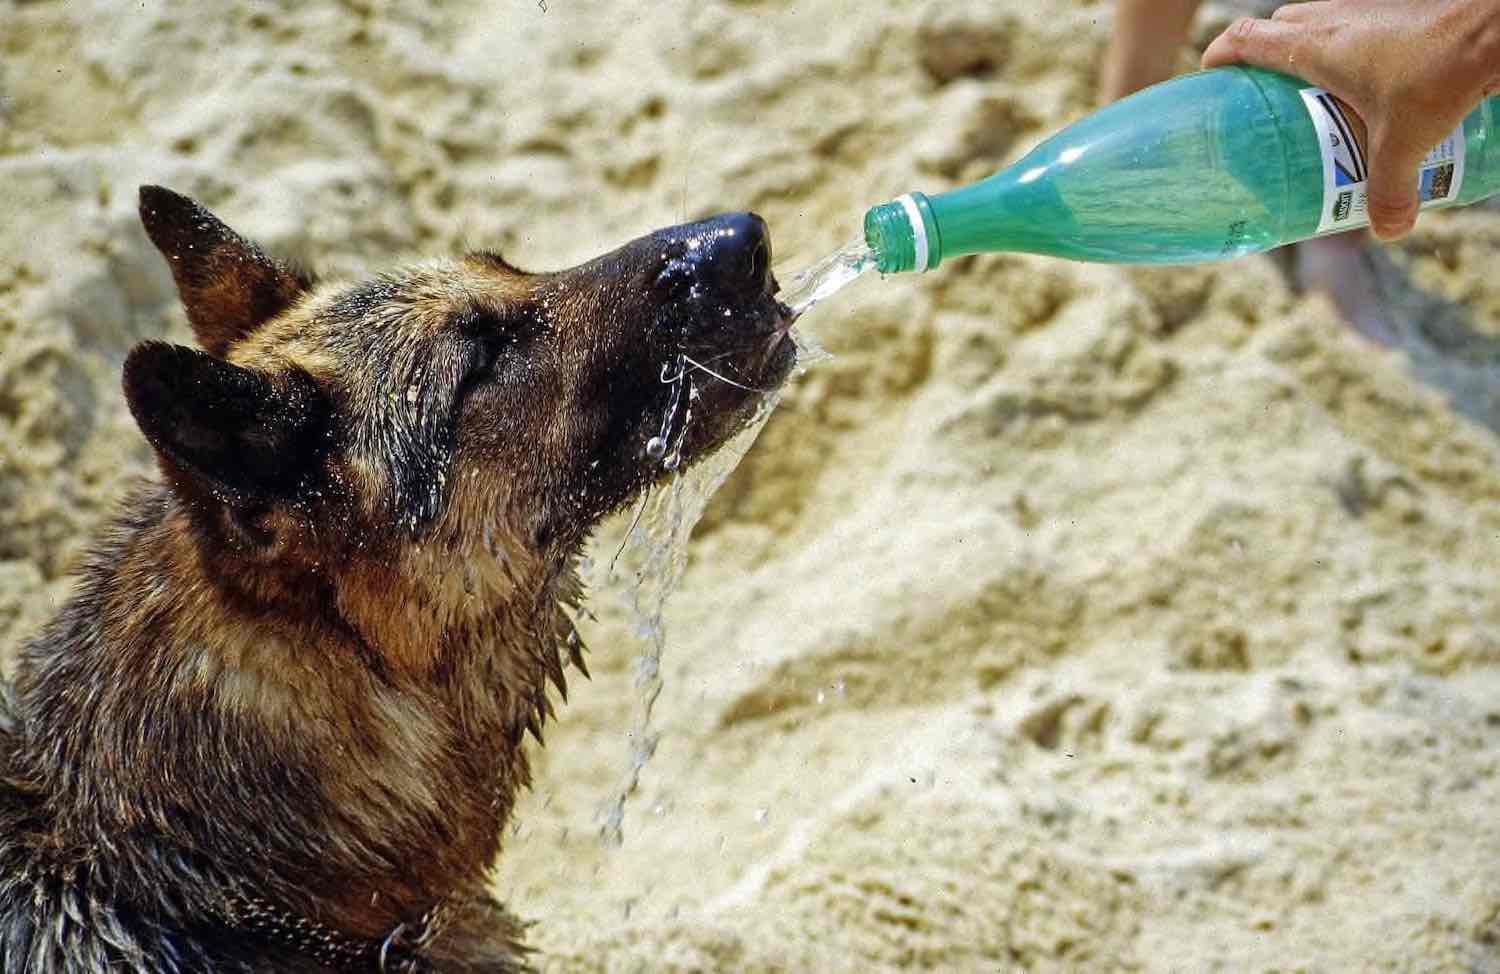 Tips to keep heated dogs cool